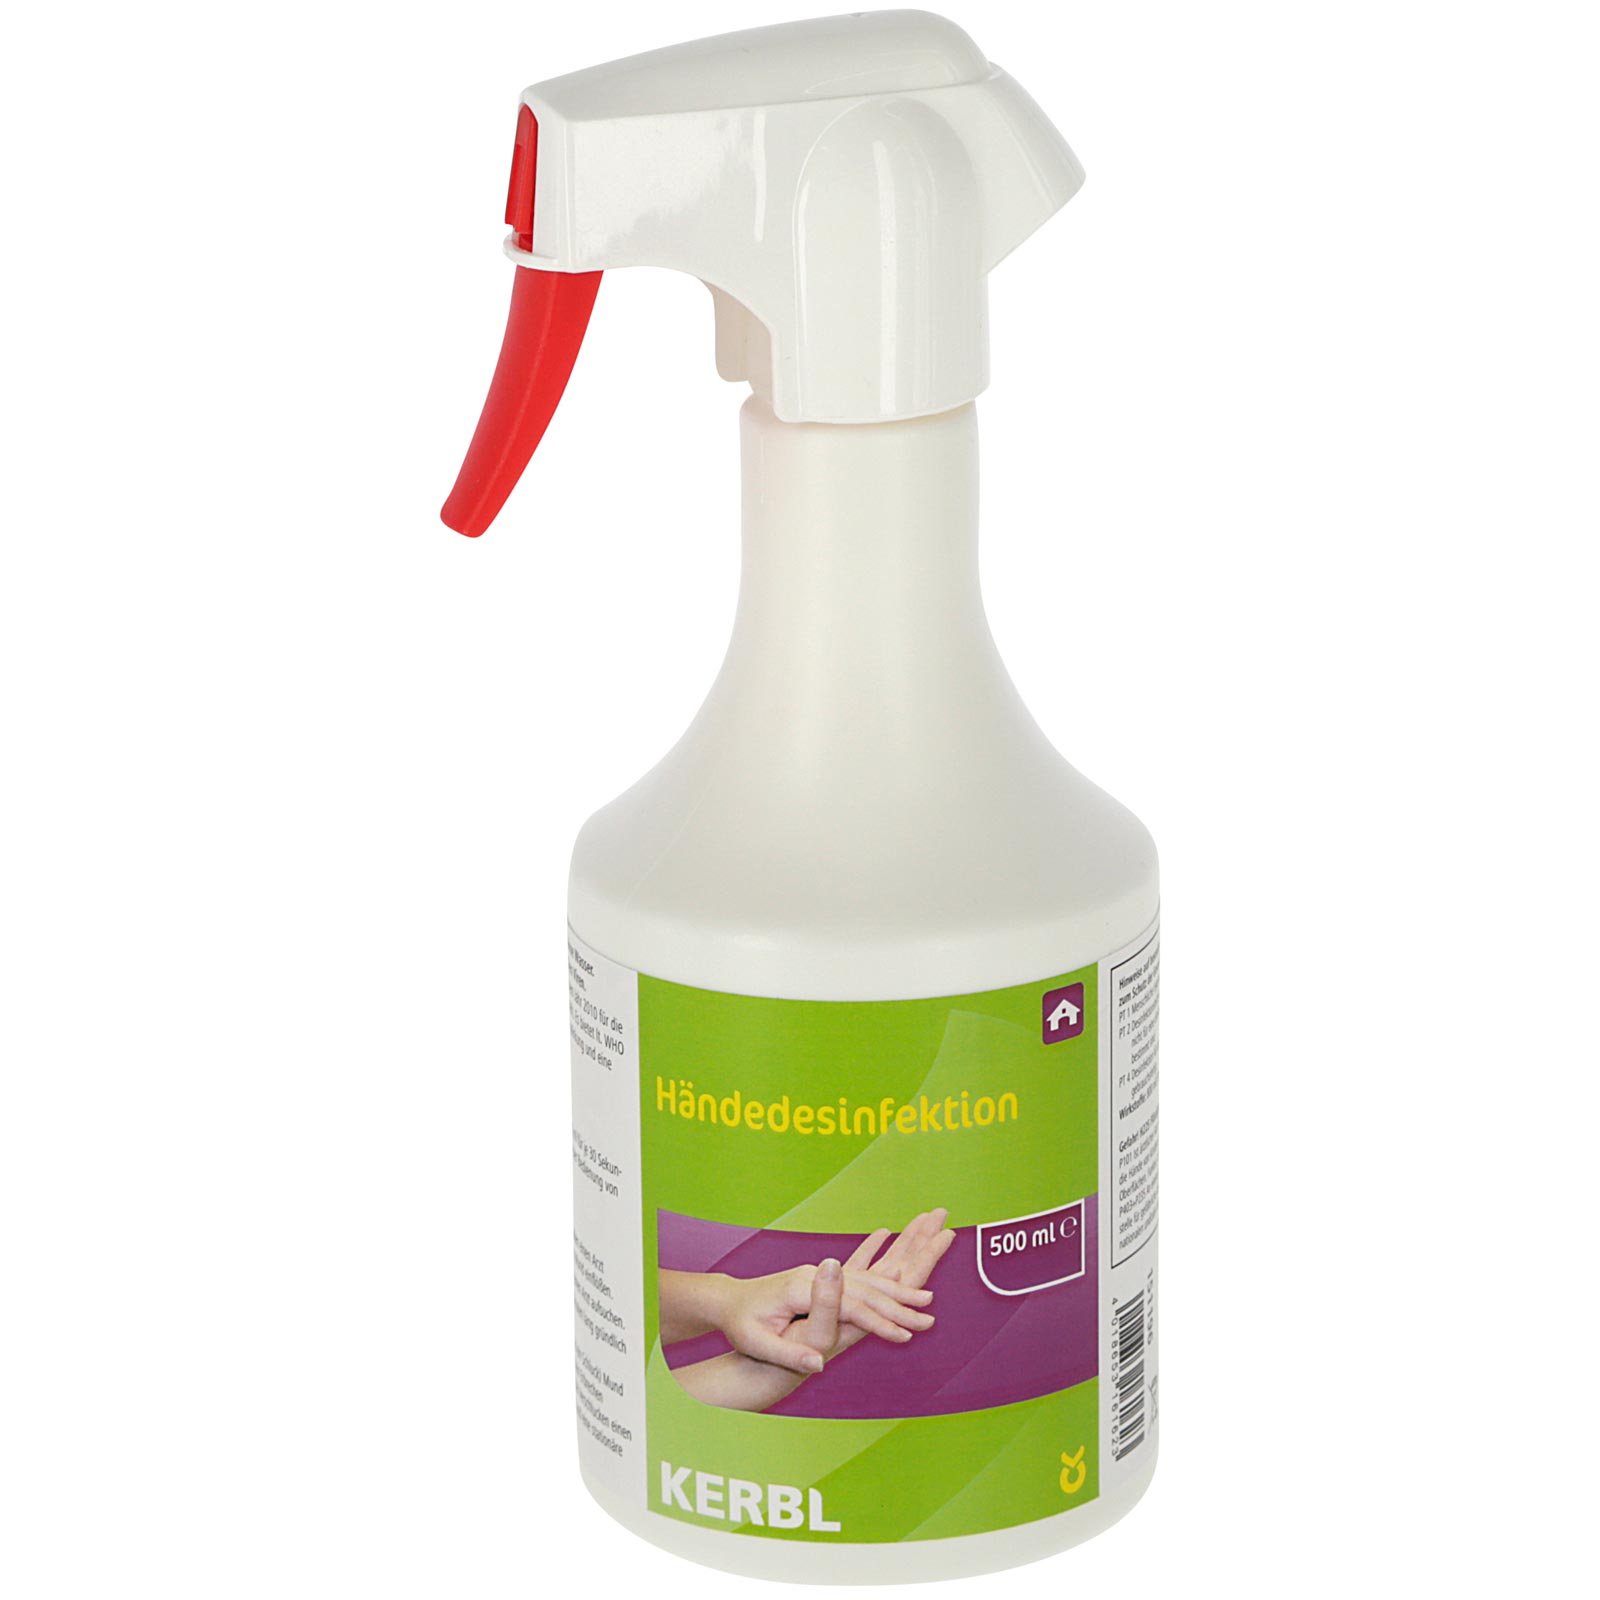 Hand disinfection with a sprayer